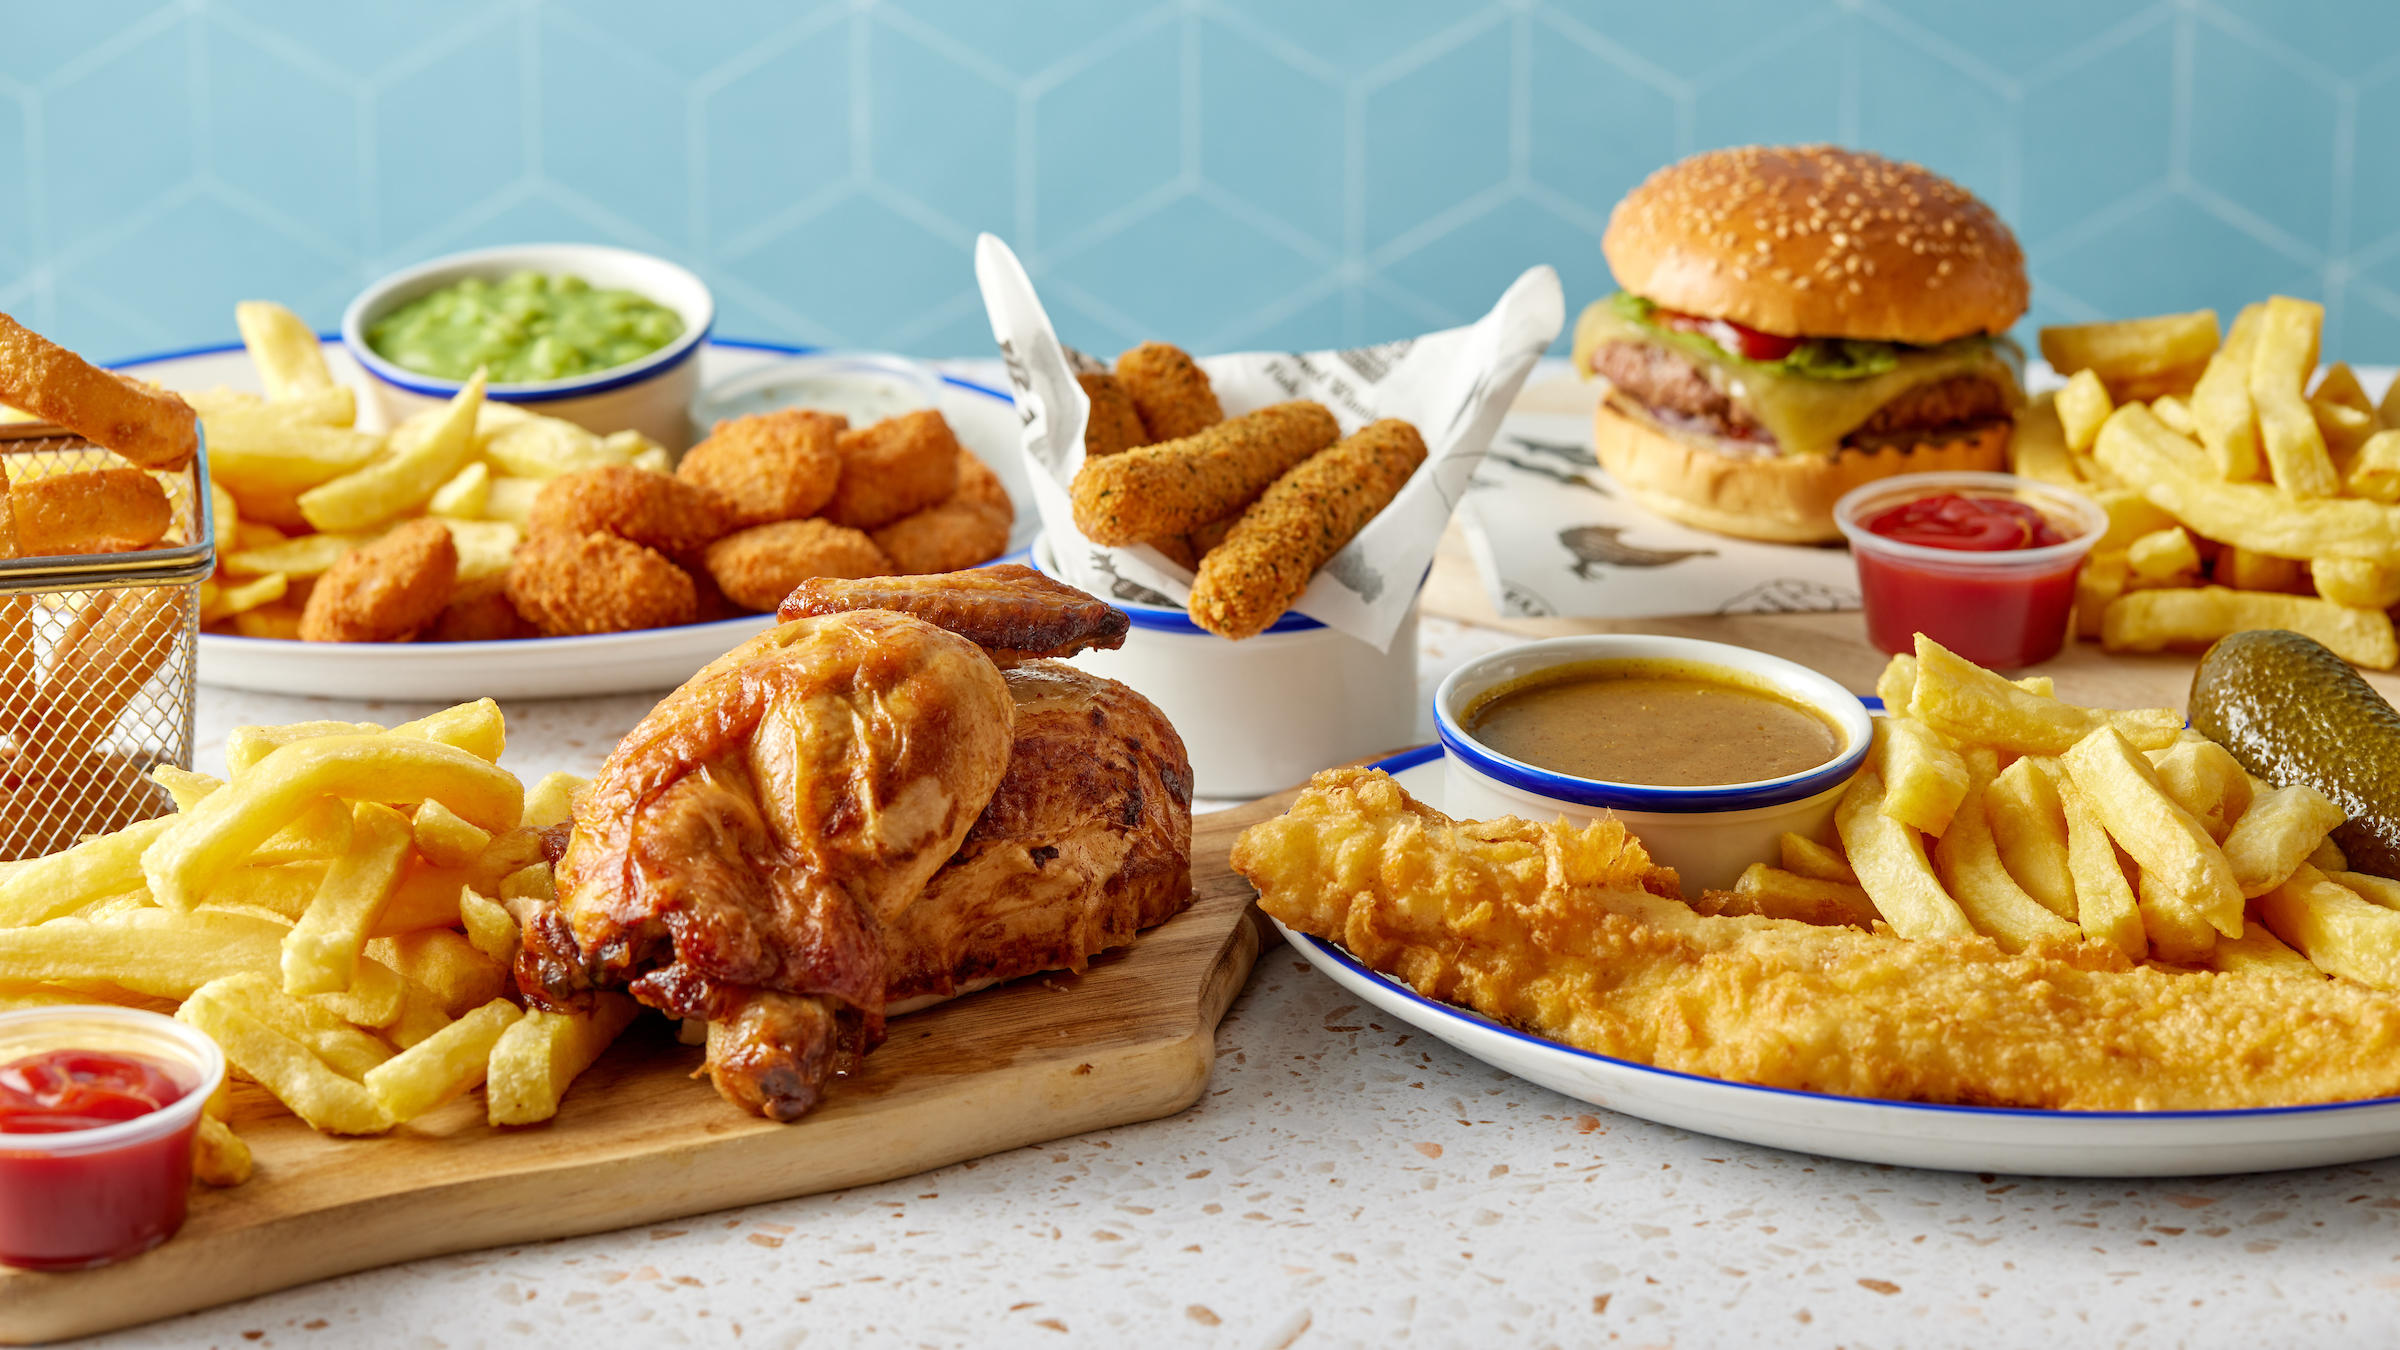 Enjoy fishnchickn your way! Order click & collect through our simple online ordering website, or ord fishnchickn Royston Royston 01763 242123